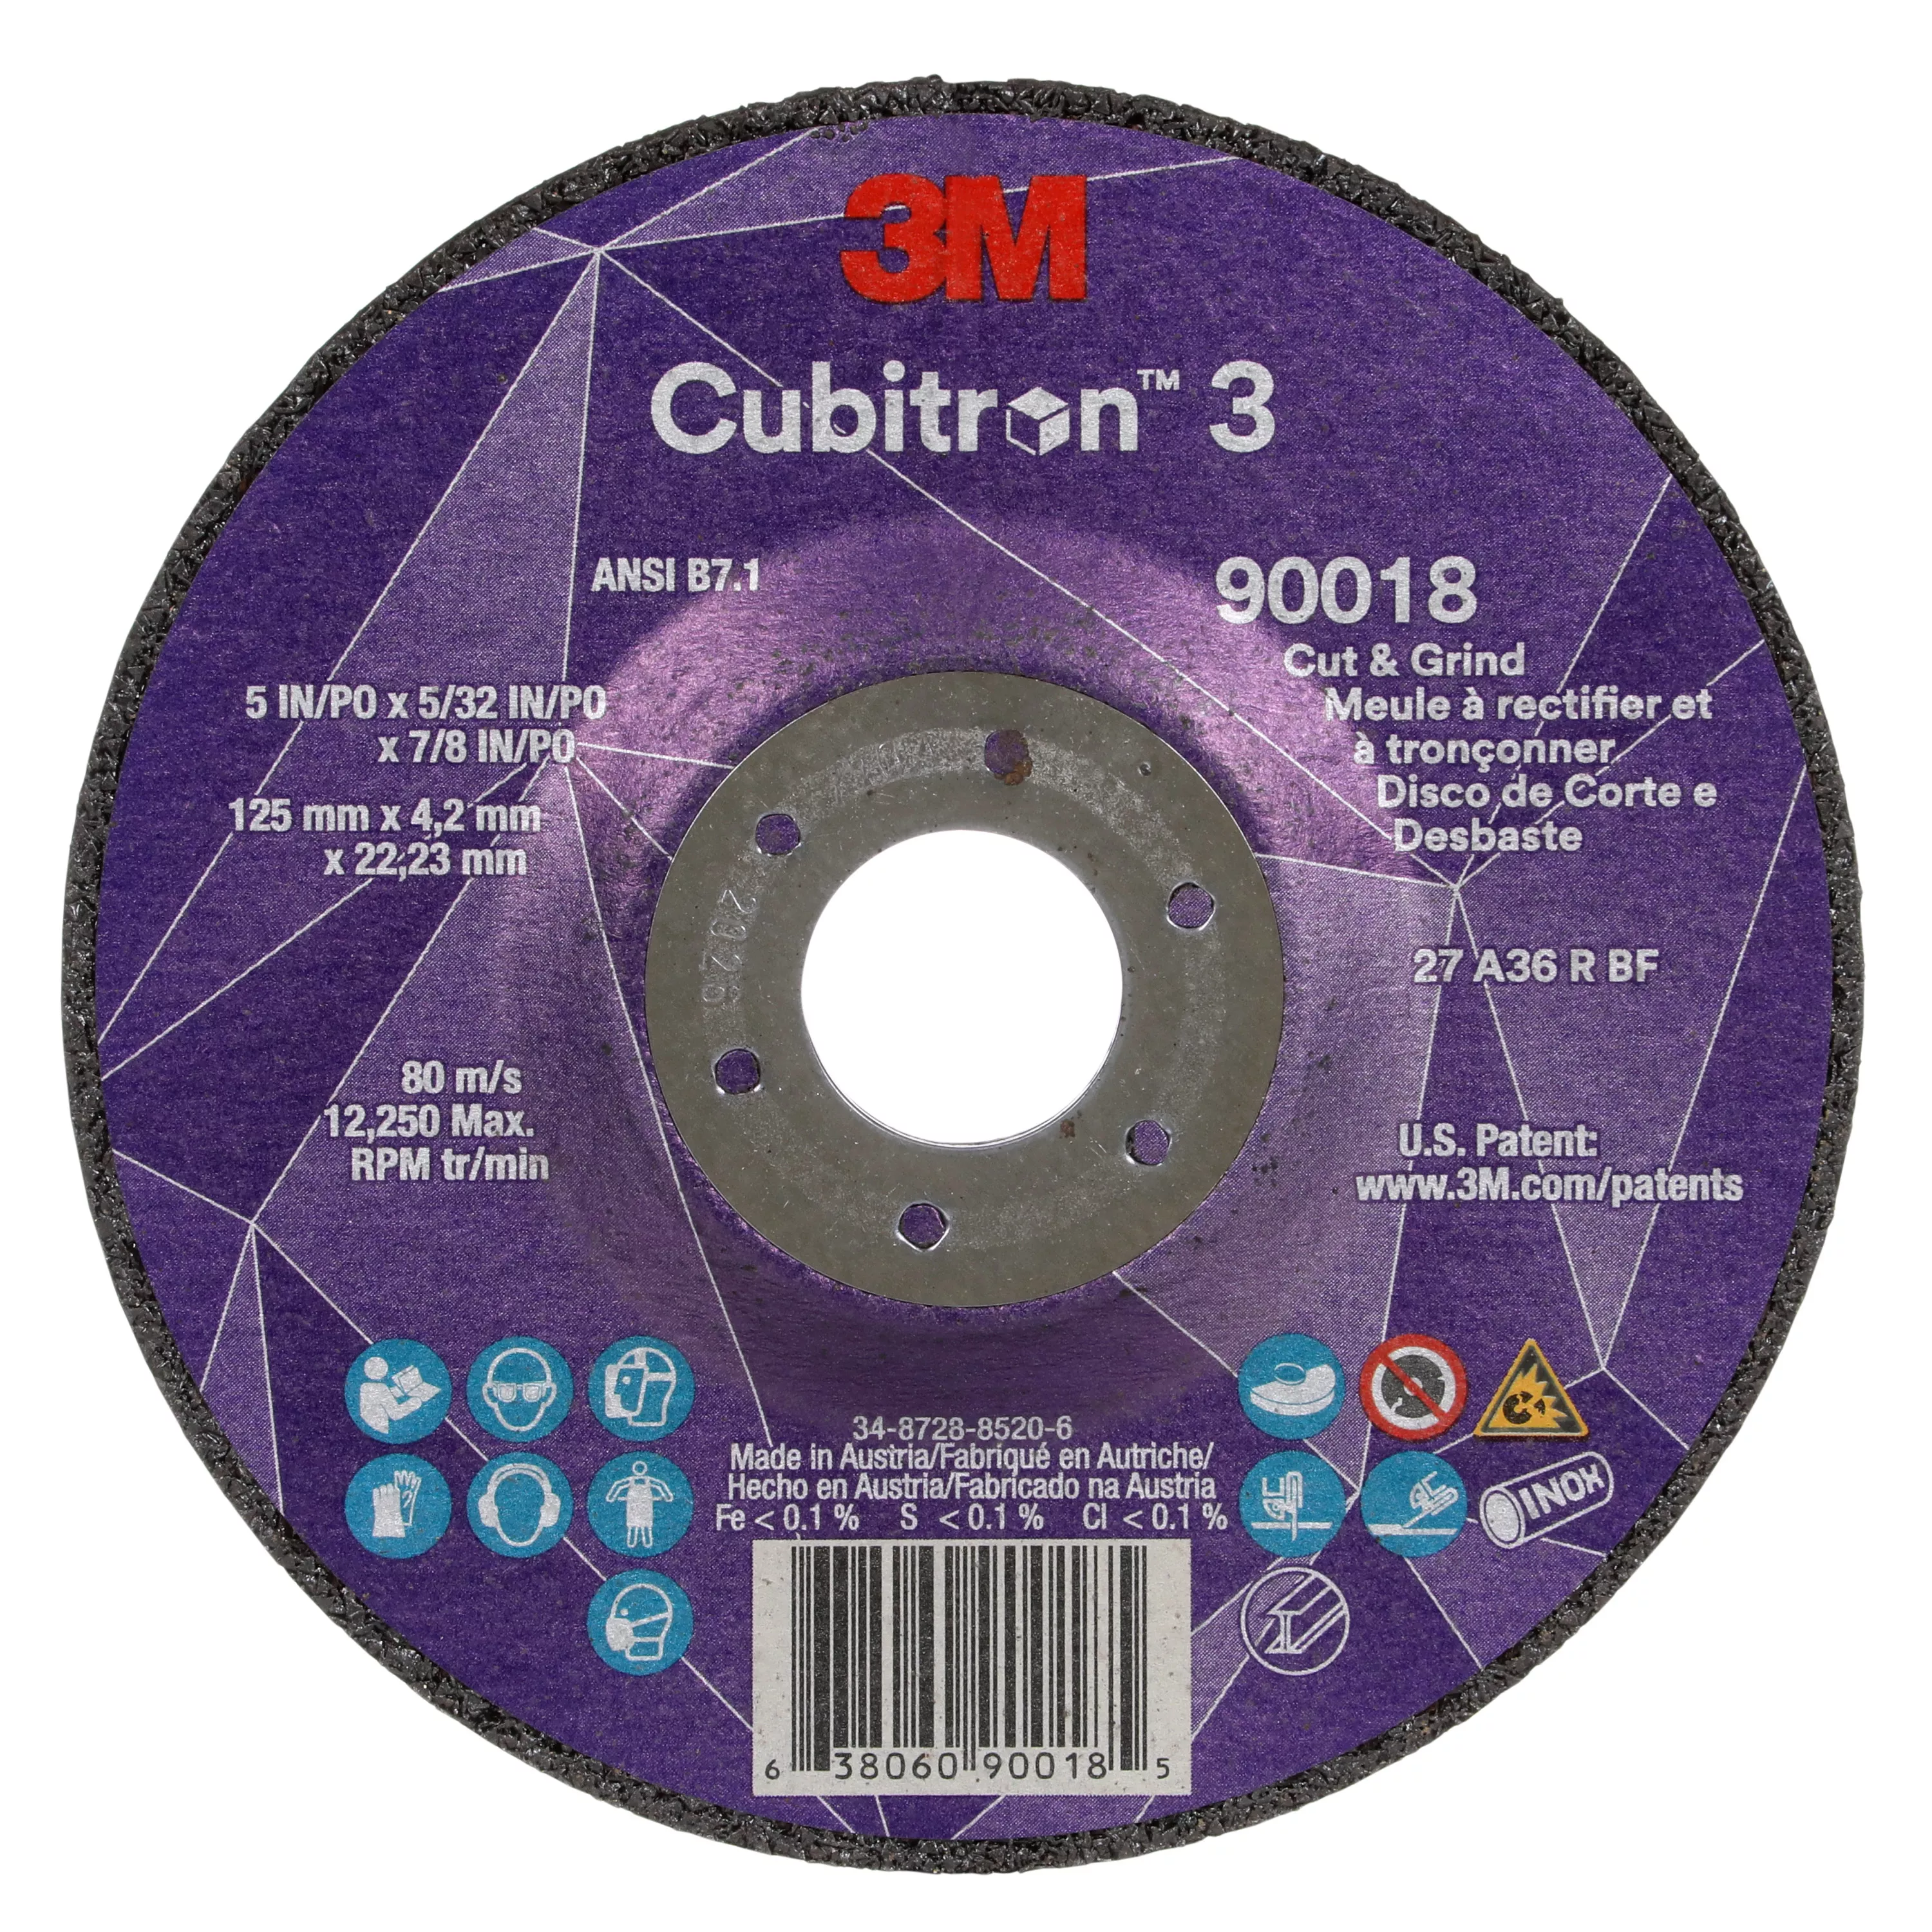 3M™ Cubitron™ 3 Cut and Grind Wheel, 90018, 36+, T27, 5 in x 5/32 in
x7/8 in (125 x 4.2 x 22.23 mm), ANSI, 10/Pack, 20 ea/Case